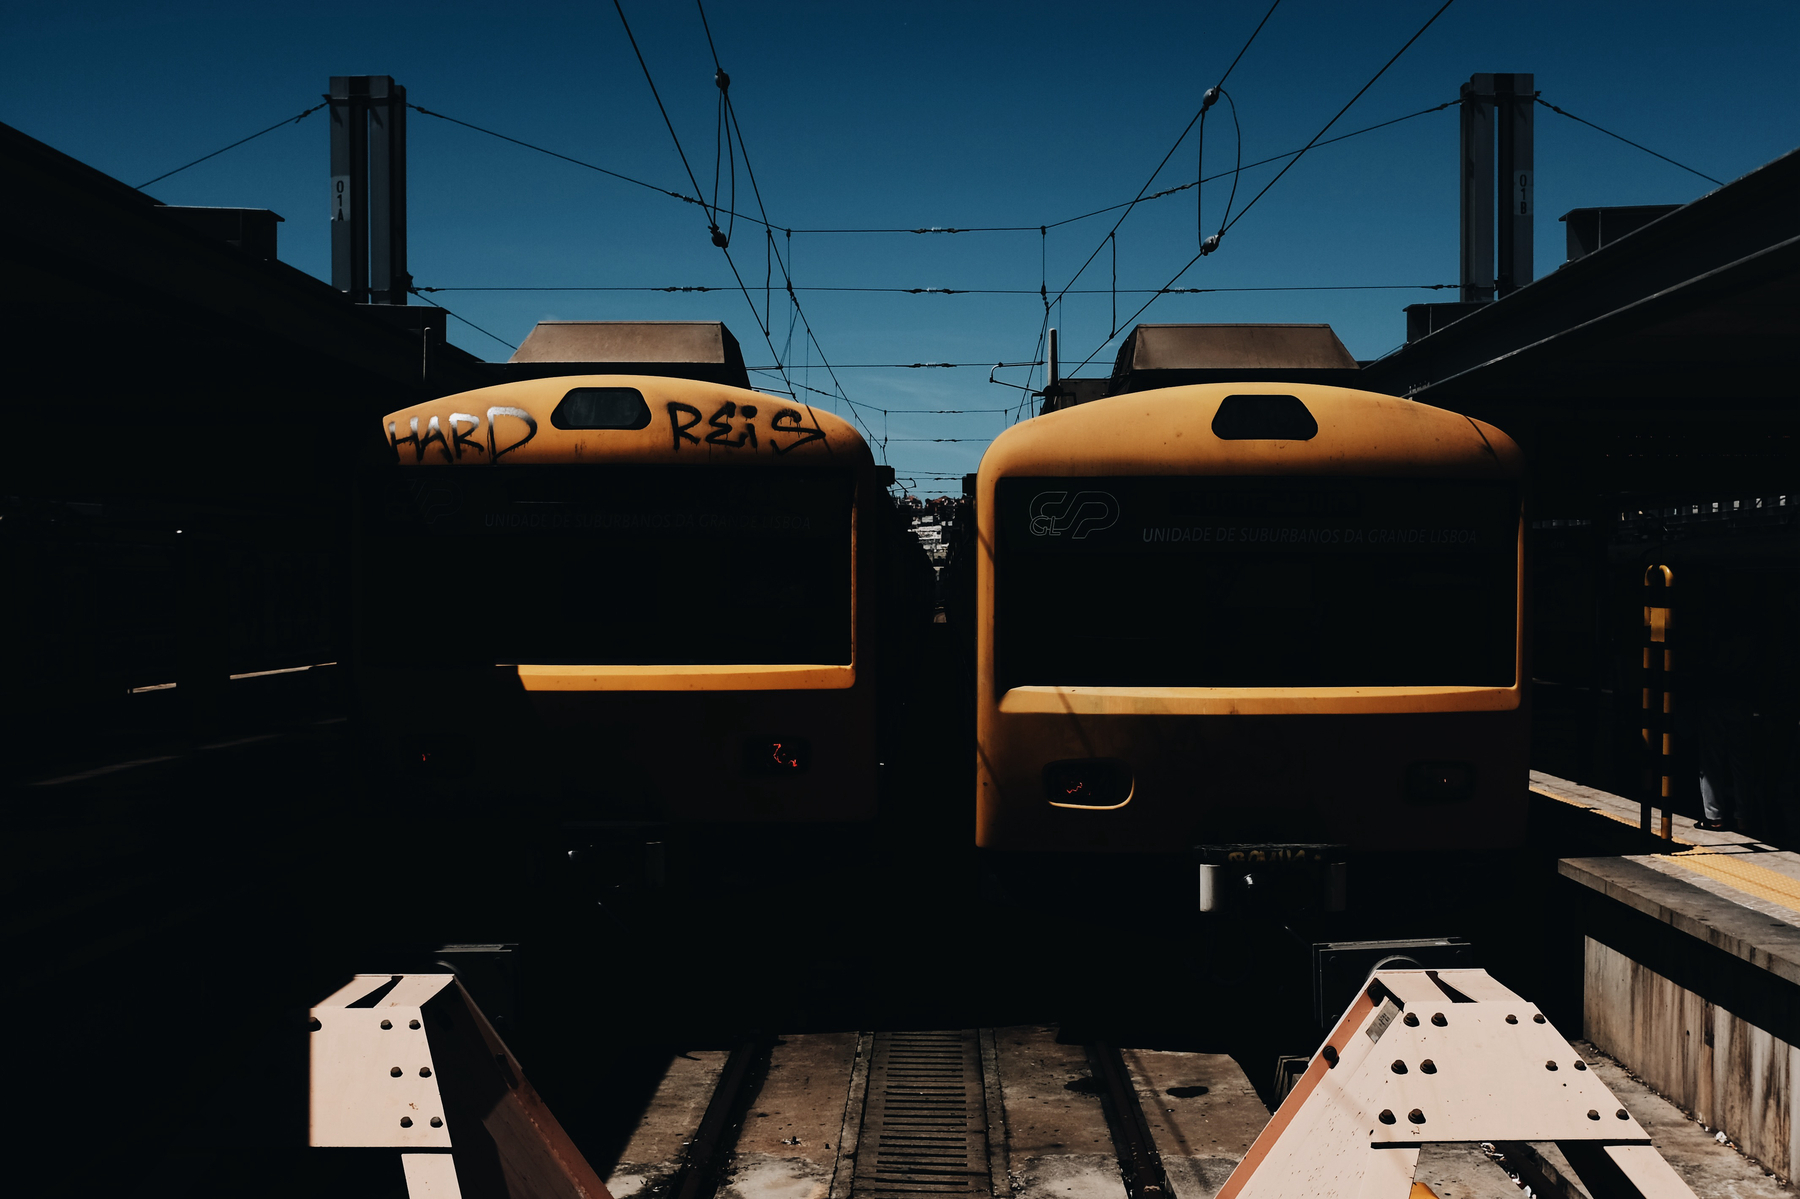 A couple of trains parked at the station.